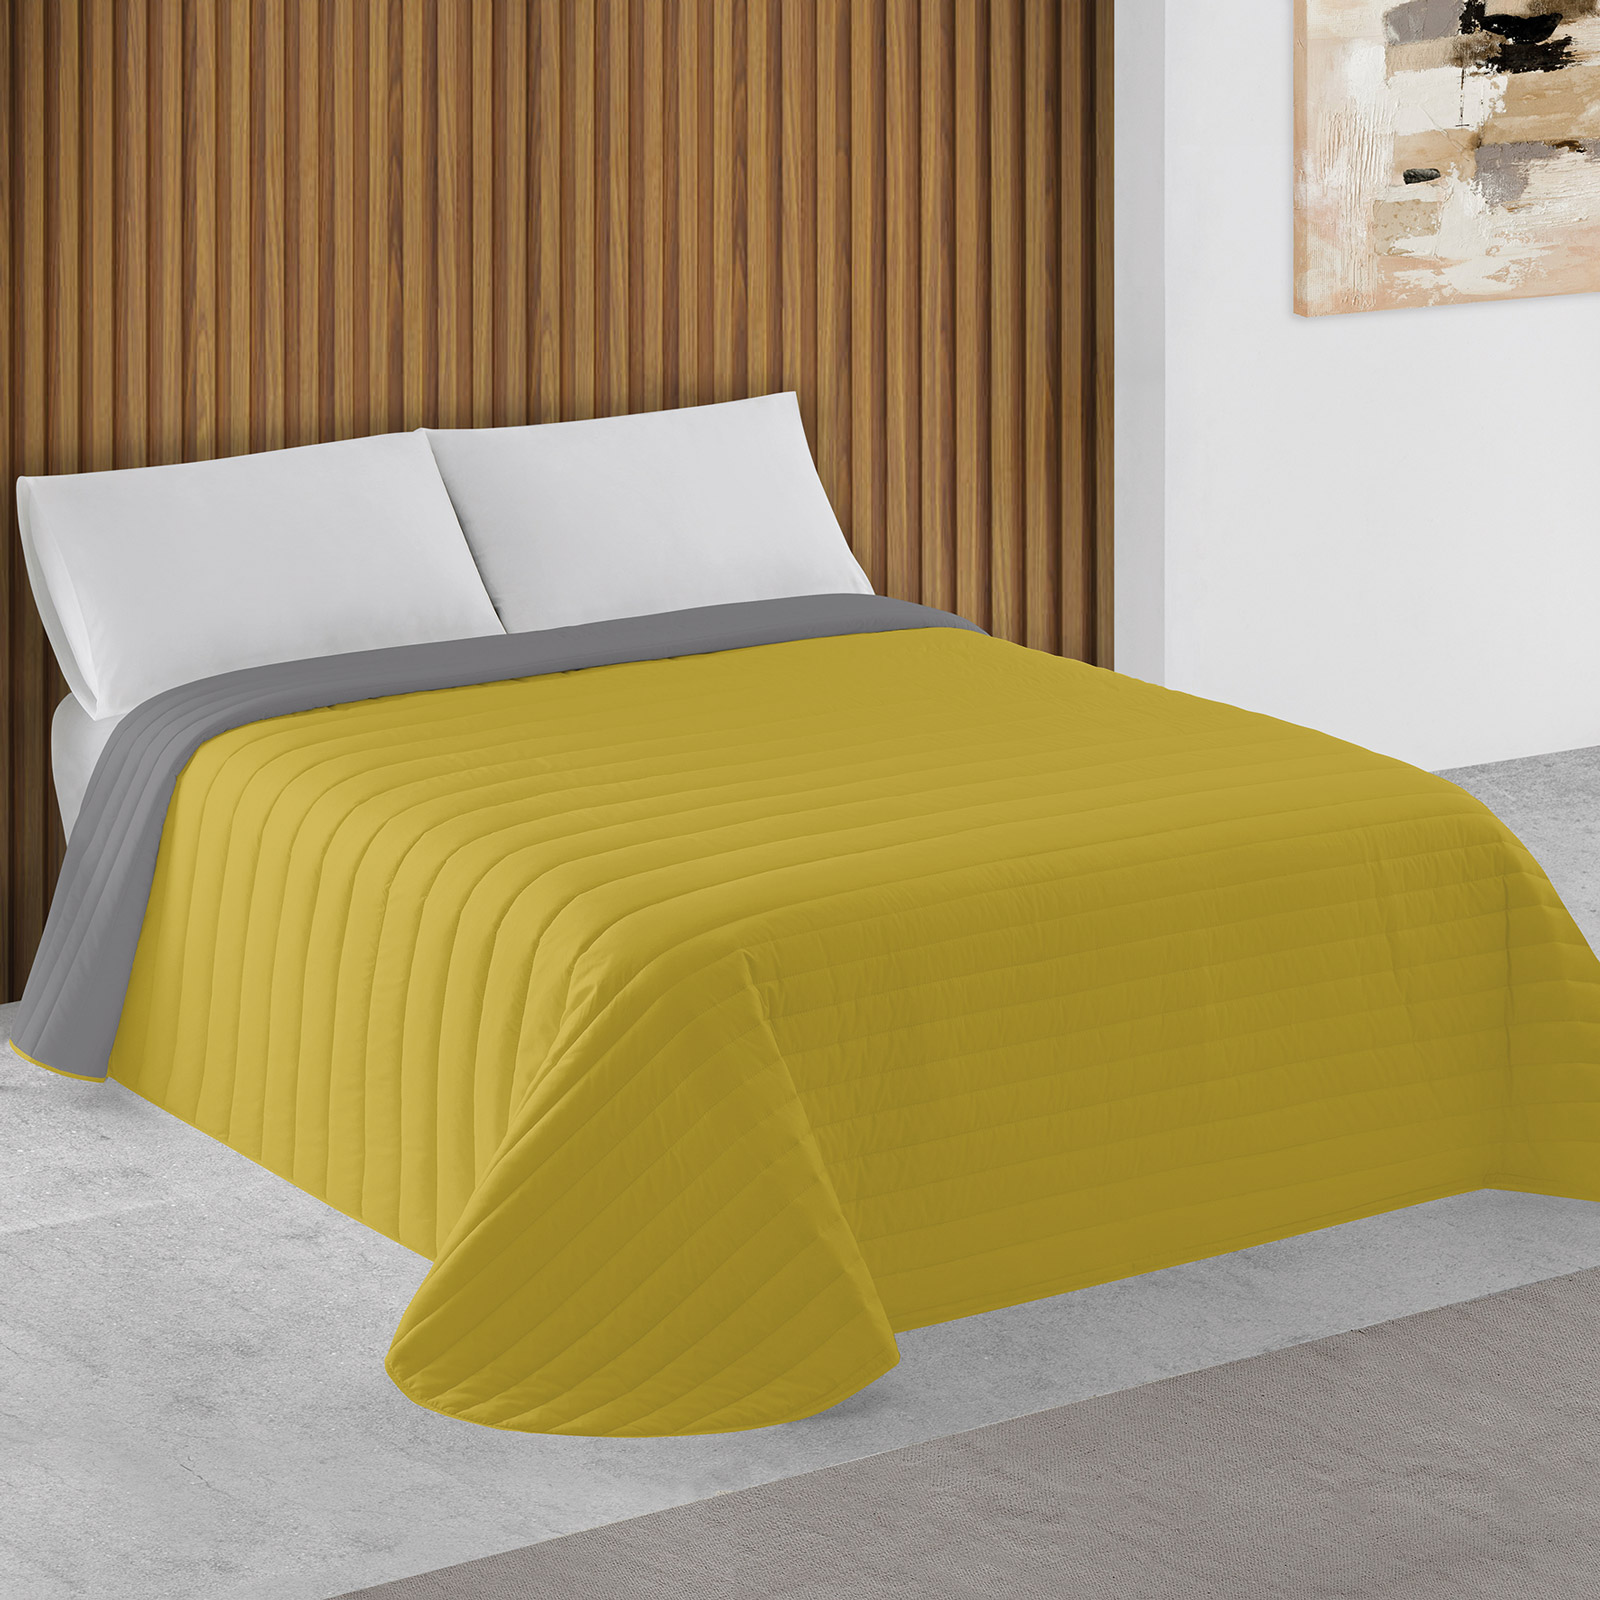 Two-tone Bouti bedspread mustard and grey